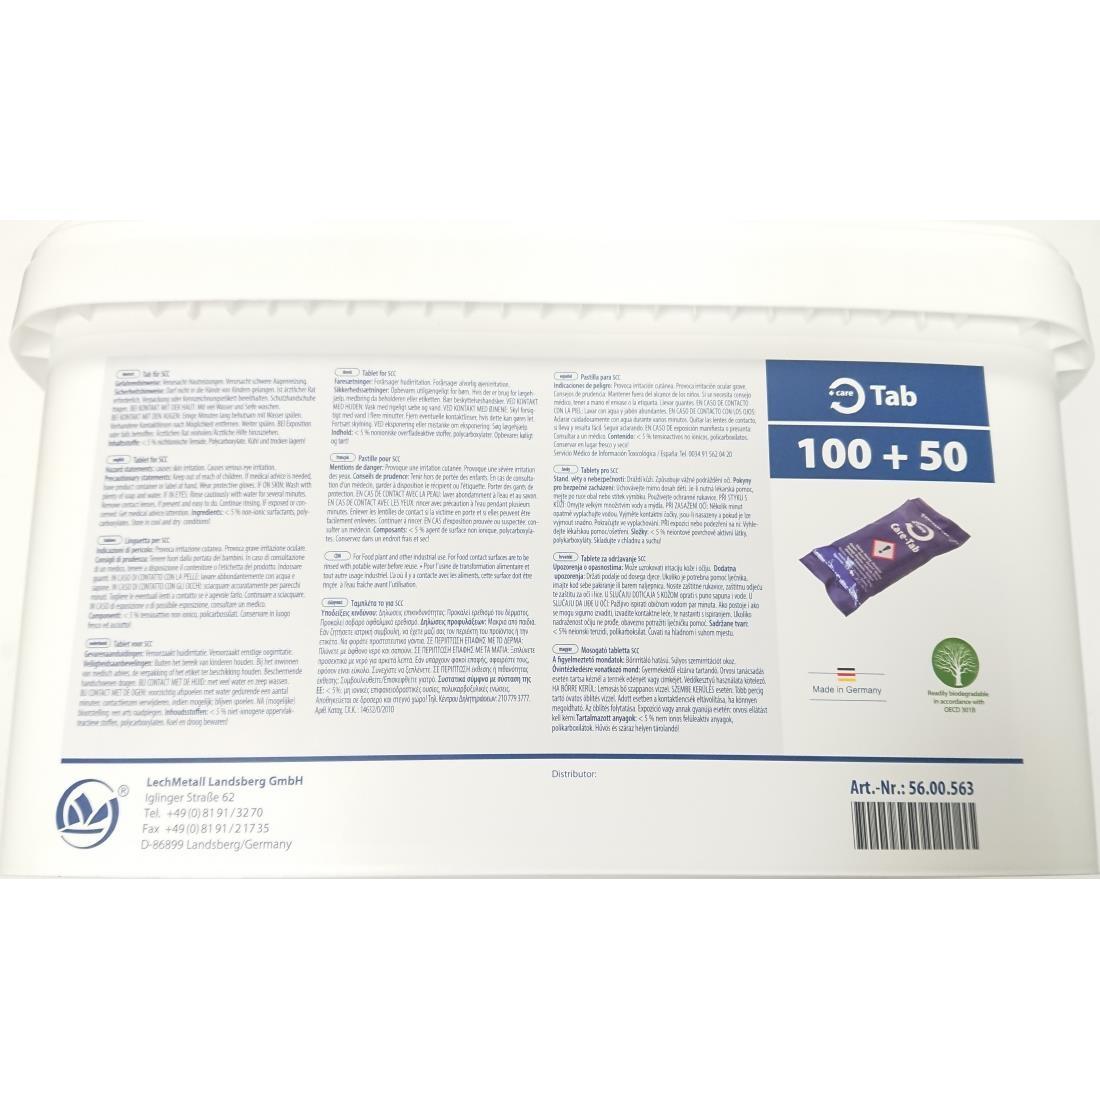 Combi Oven Care Control Tablets Blue (Pack of 150) - DL249  - 2